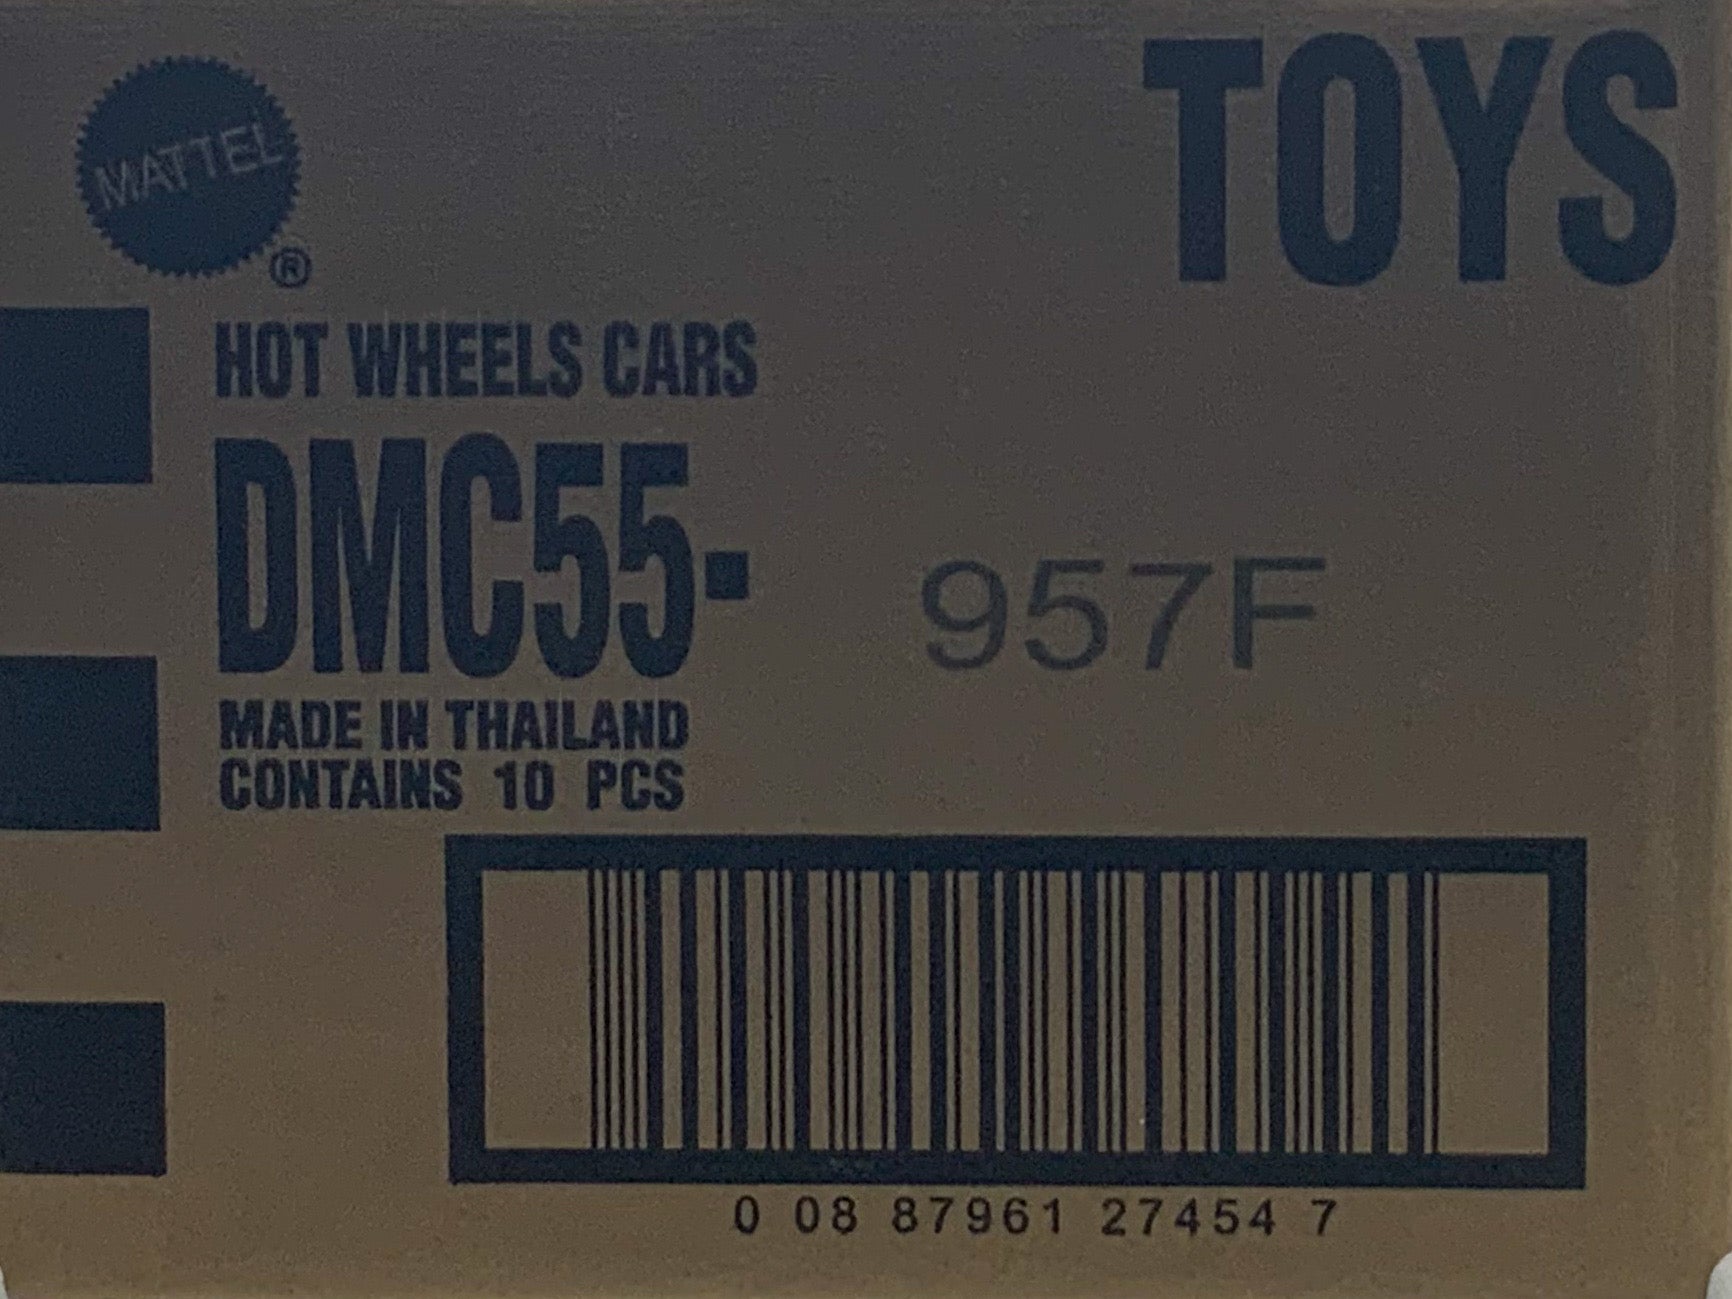 Buy at Tatoy Products Direct from Shipper Manufacturer Box Made in Thailand Hot Wheels Cars Toys Mattel DMC55 0087961274547